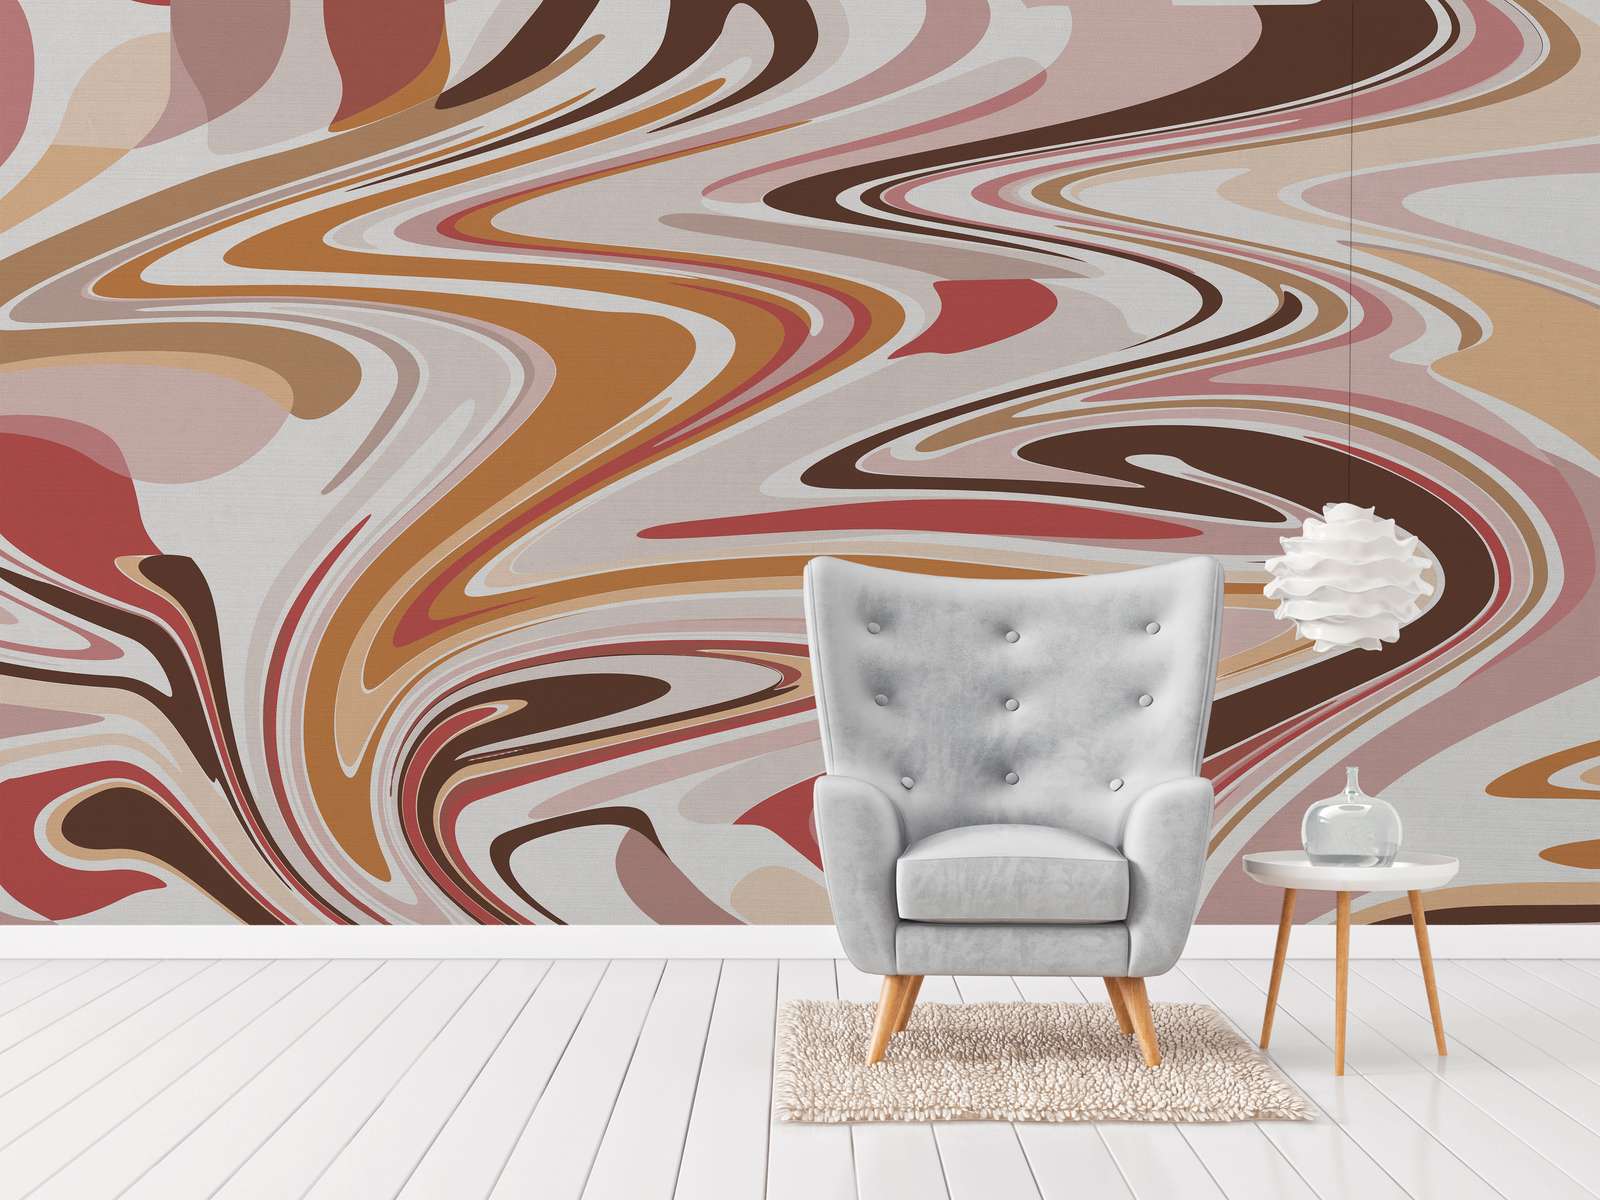             Photo wallpaper with abstract colour pattern in warm tones - pink, beige, red
        